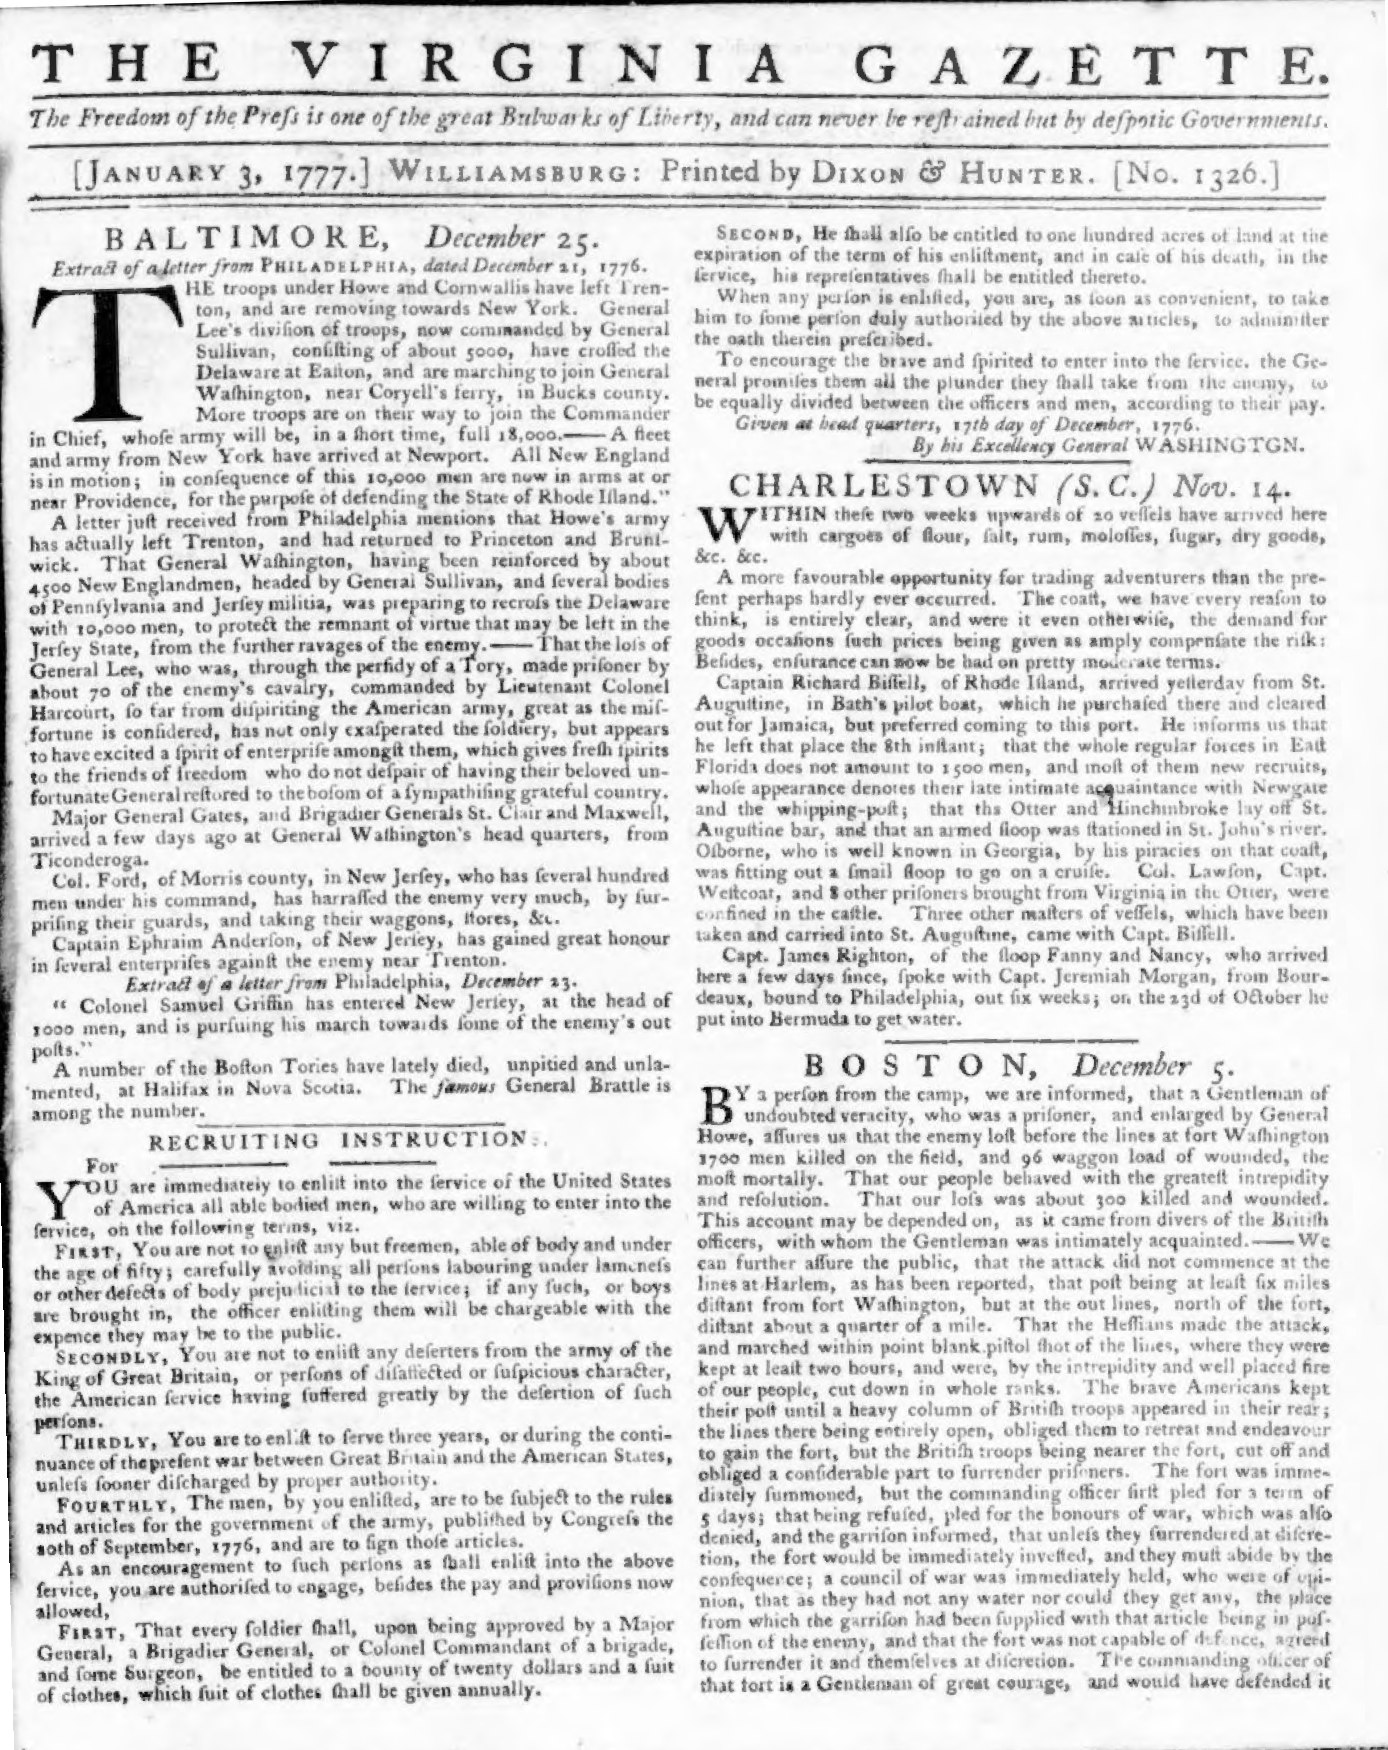 General-George-Washington-Recruiting-Instructions-for-the-Continental-Army-in-the-Virginia-Gazette-Newspaper-January-3-1777